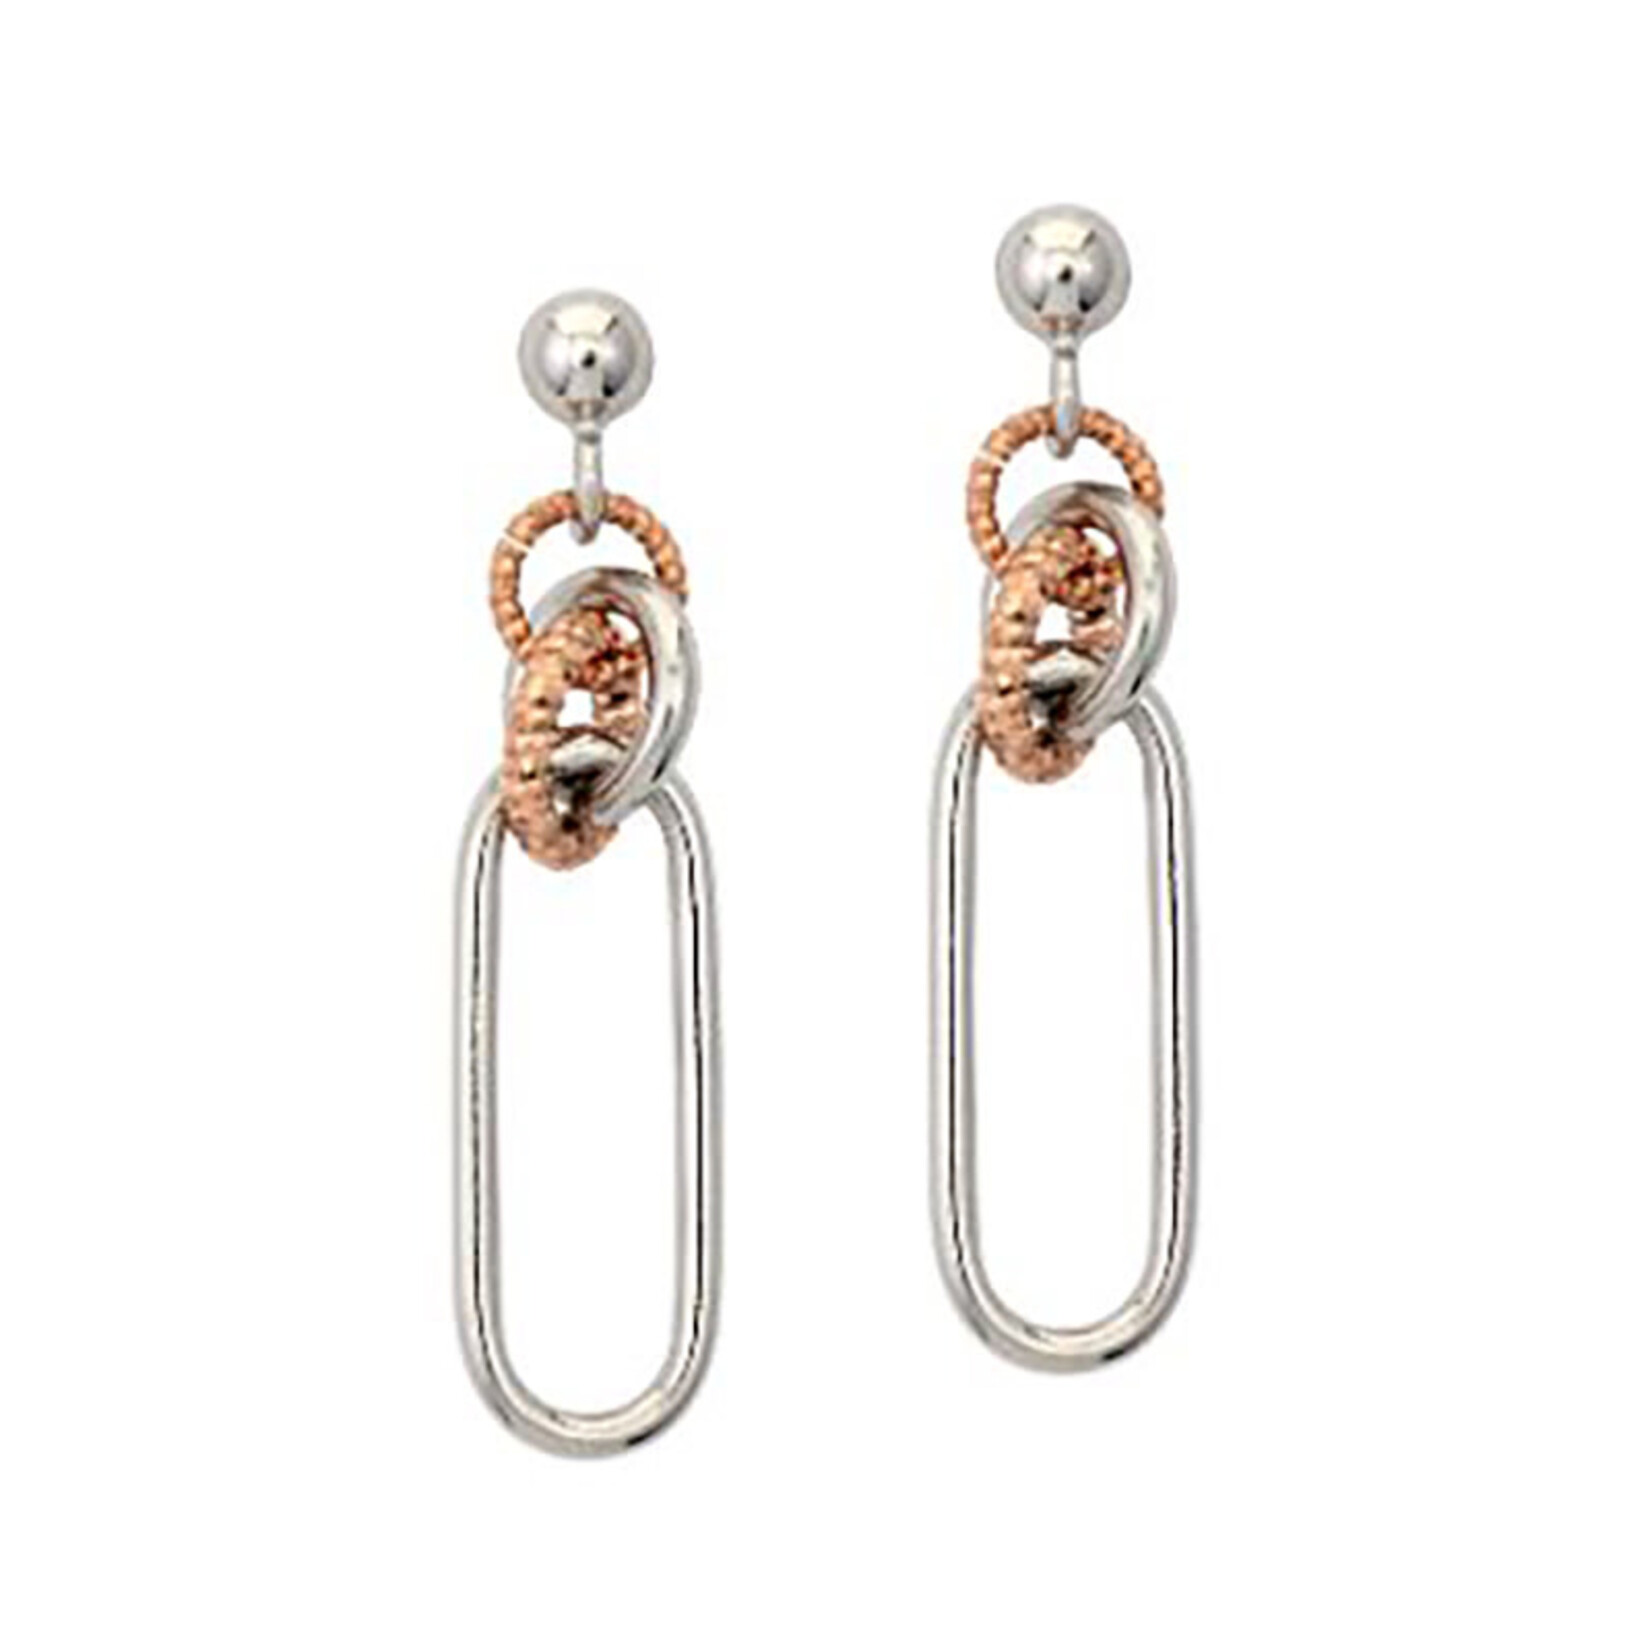 Frederic Duclos SS/RGP Paperclip and Circle Earrings